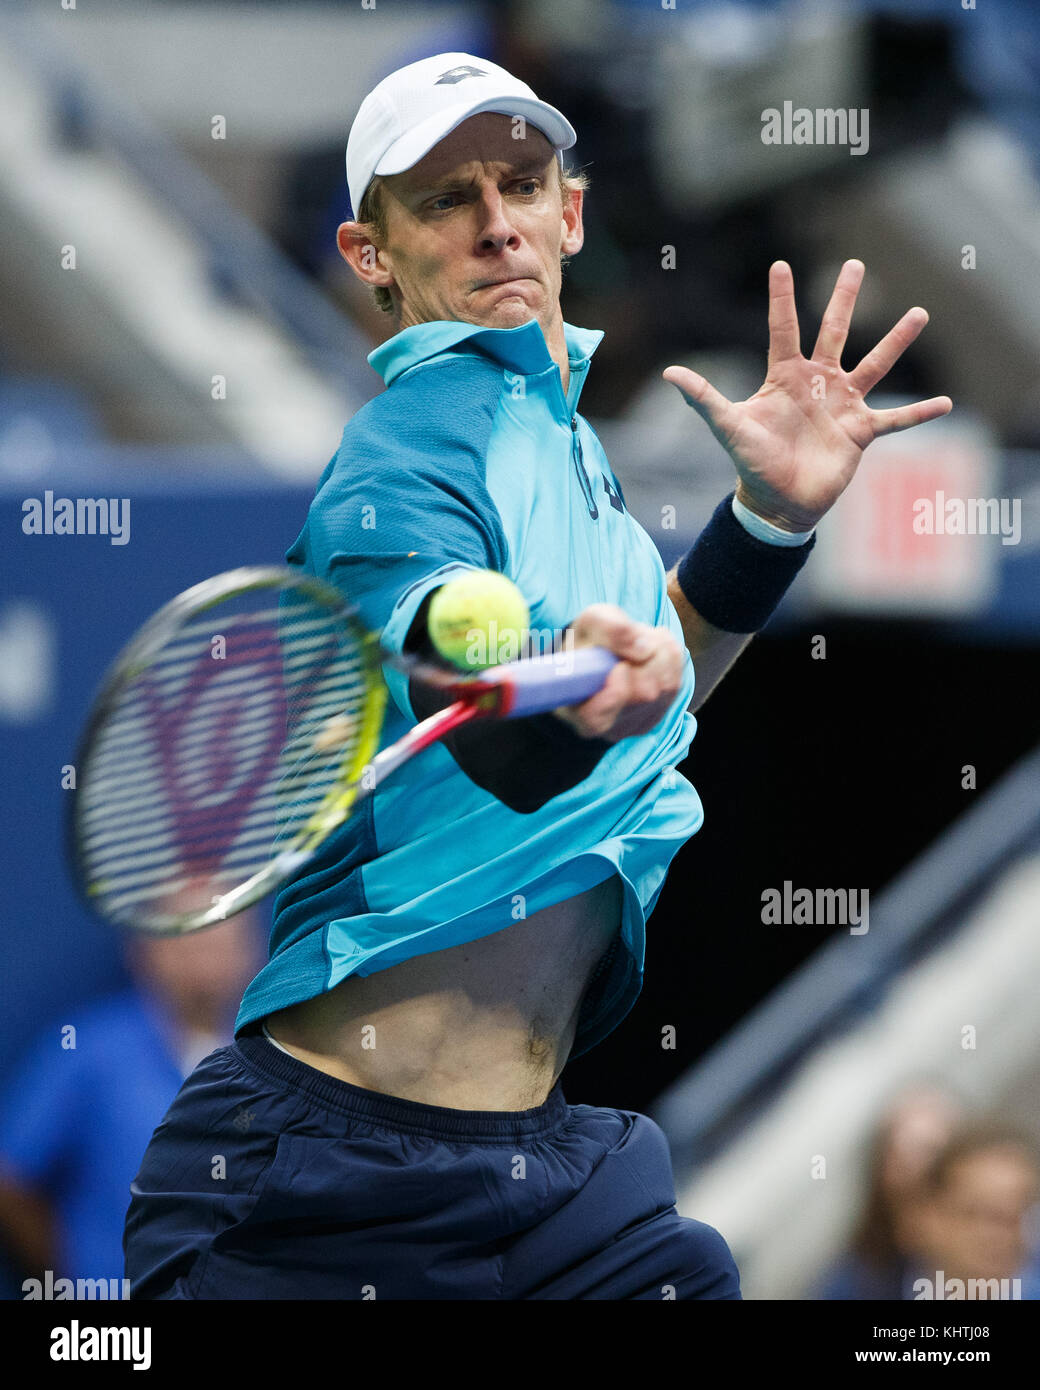 South African tennis player KEVIN ANDERSON (RSA) plays forehand shot during  men's singles match at US Open 2017 Tennis Championship, New York City  Stock Photo - Alamy